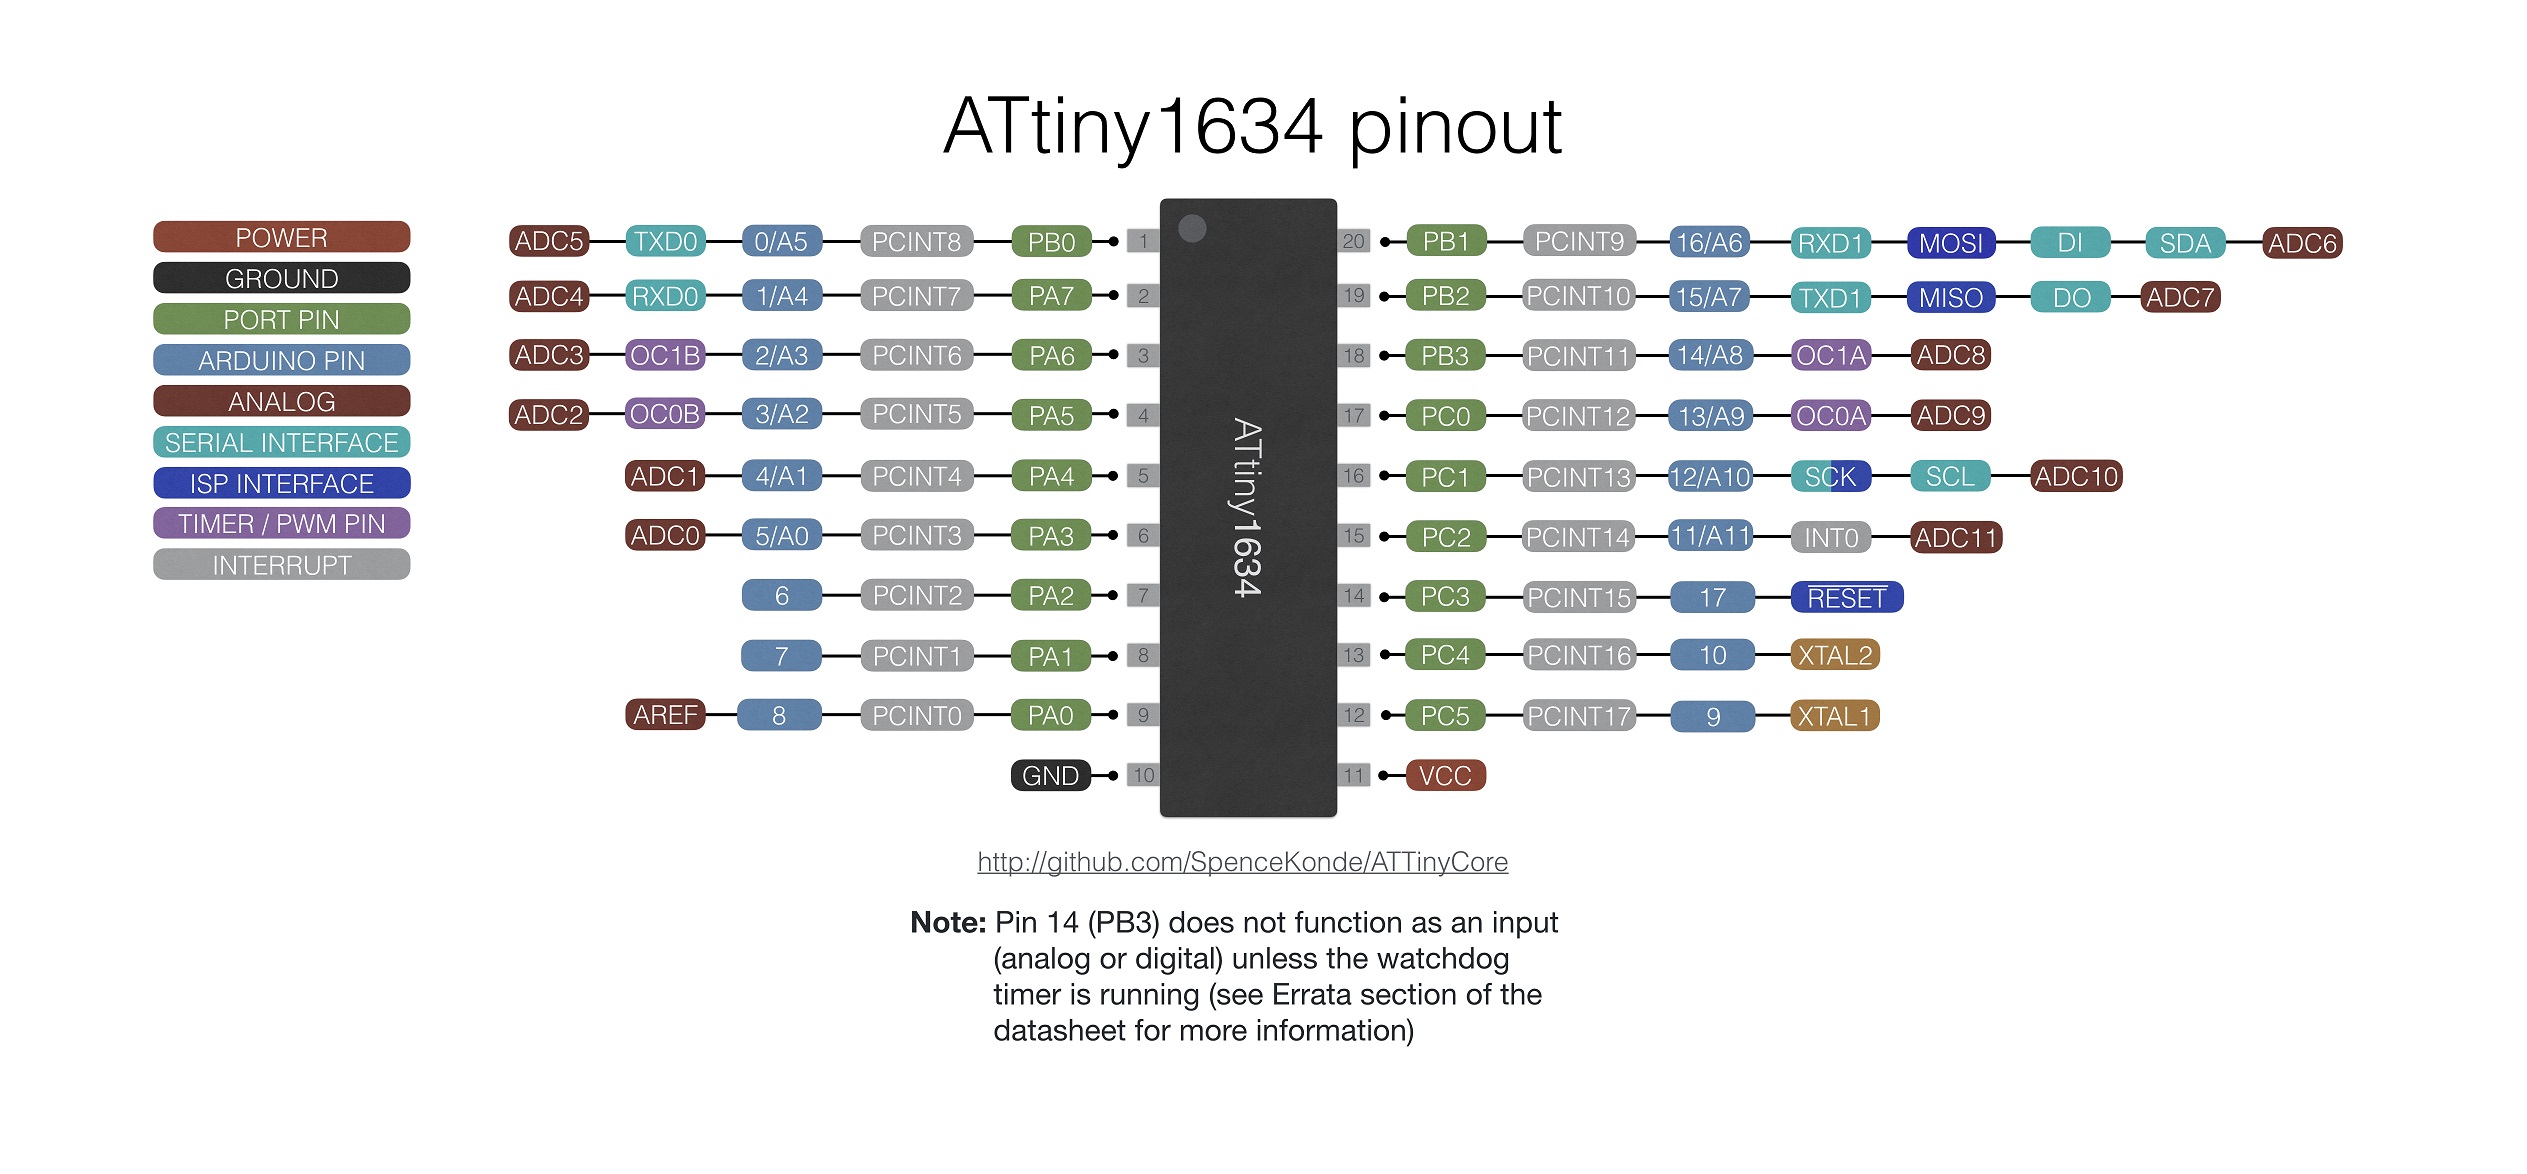 1634 pin mapping